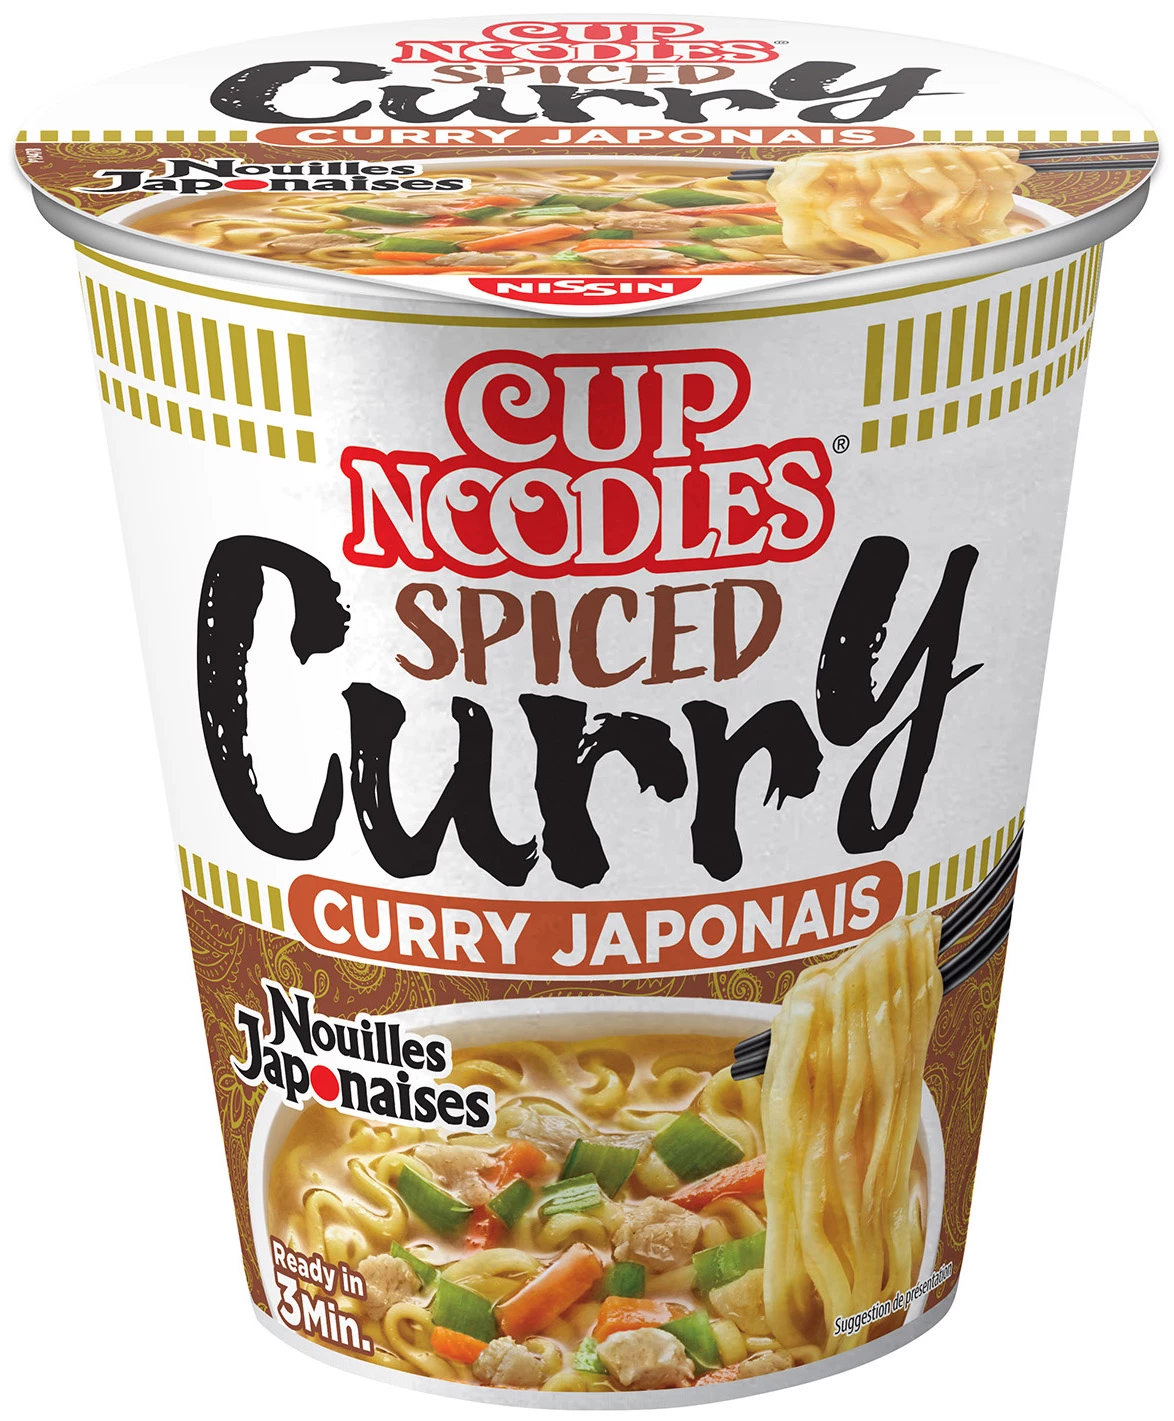 Japanese curry noodles - NISSIN